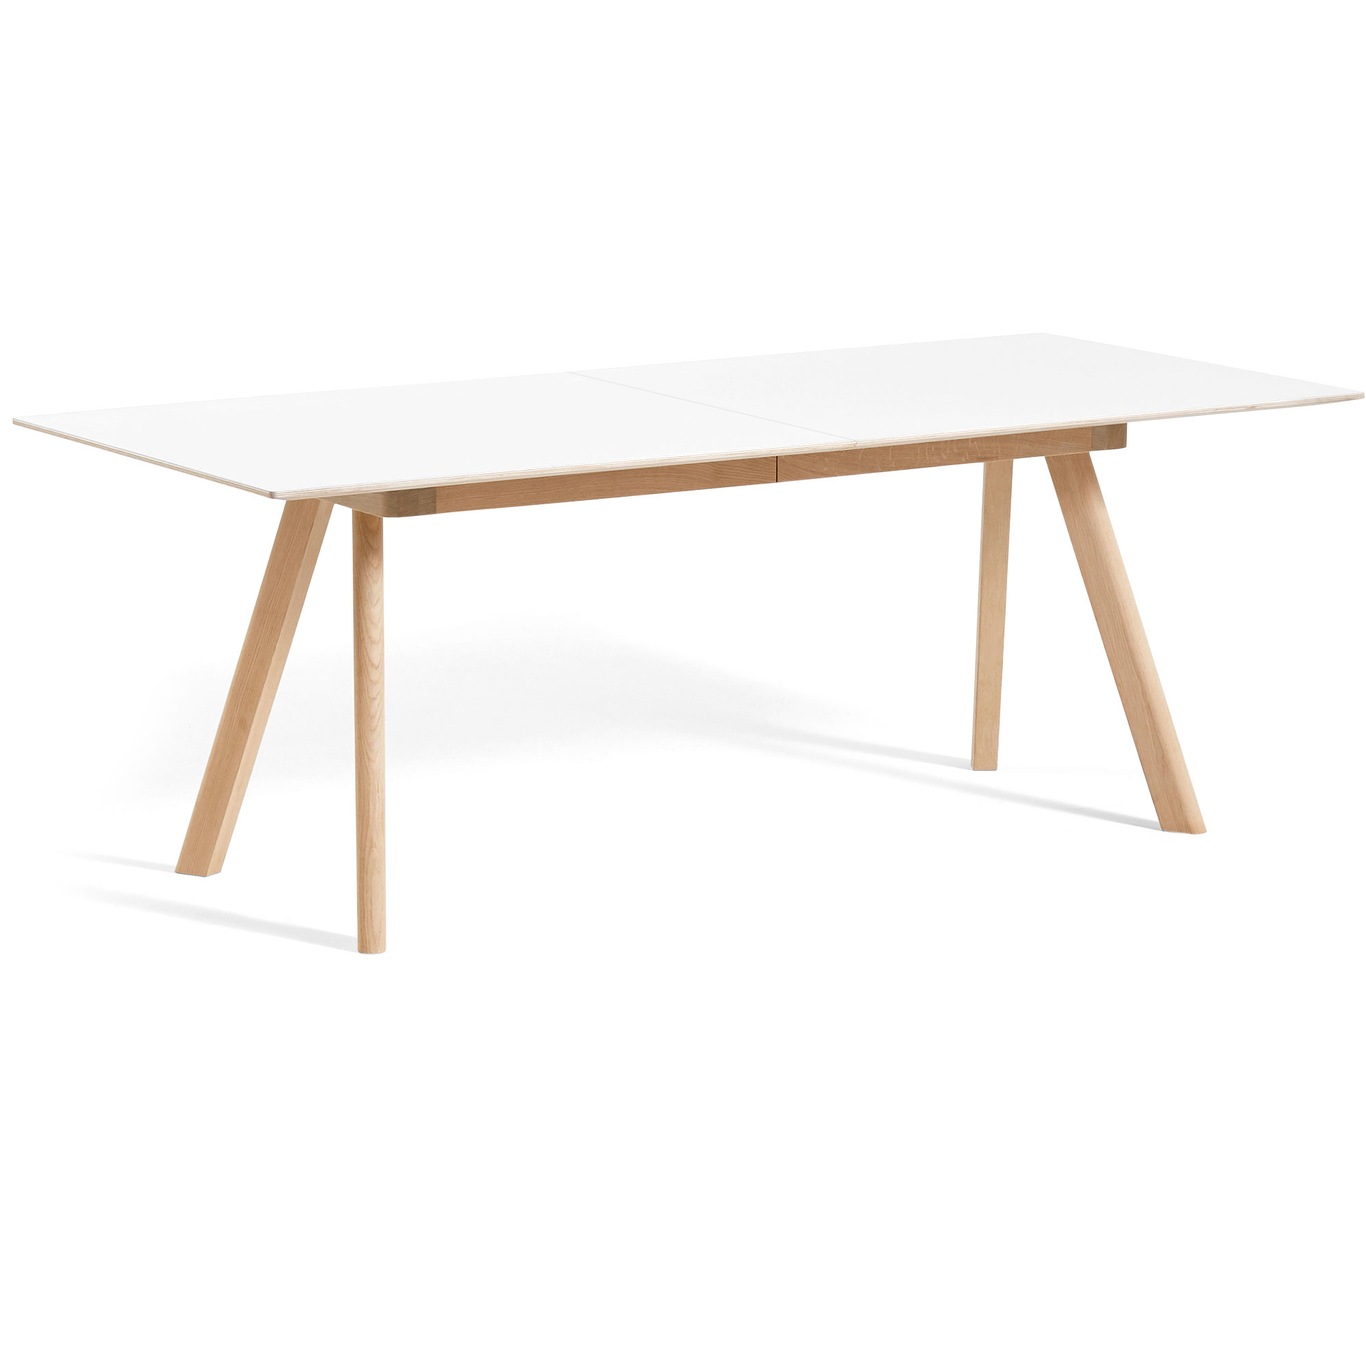 CPH 30 Table Extendable 200-400 cm, Water-based Lacquered Oak/White Laminate